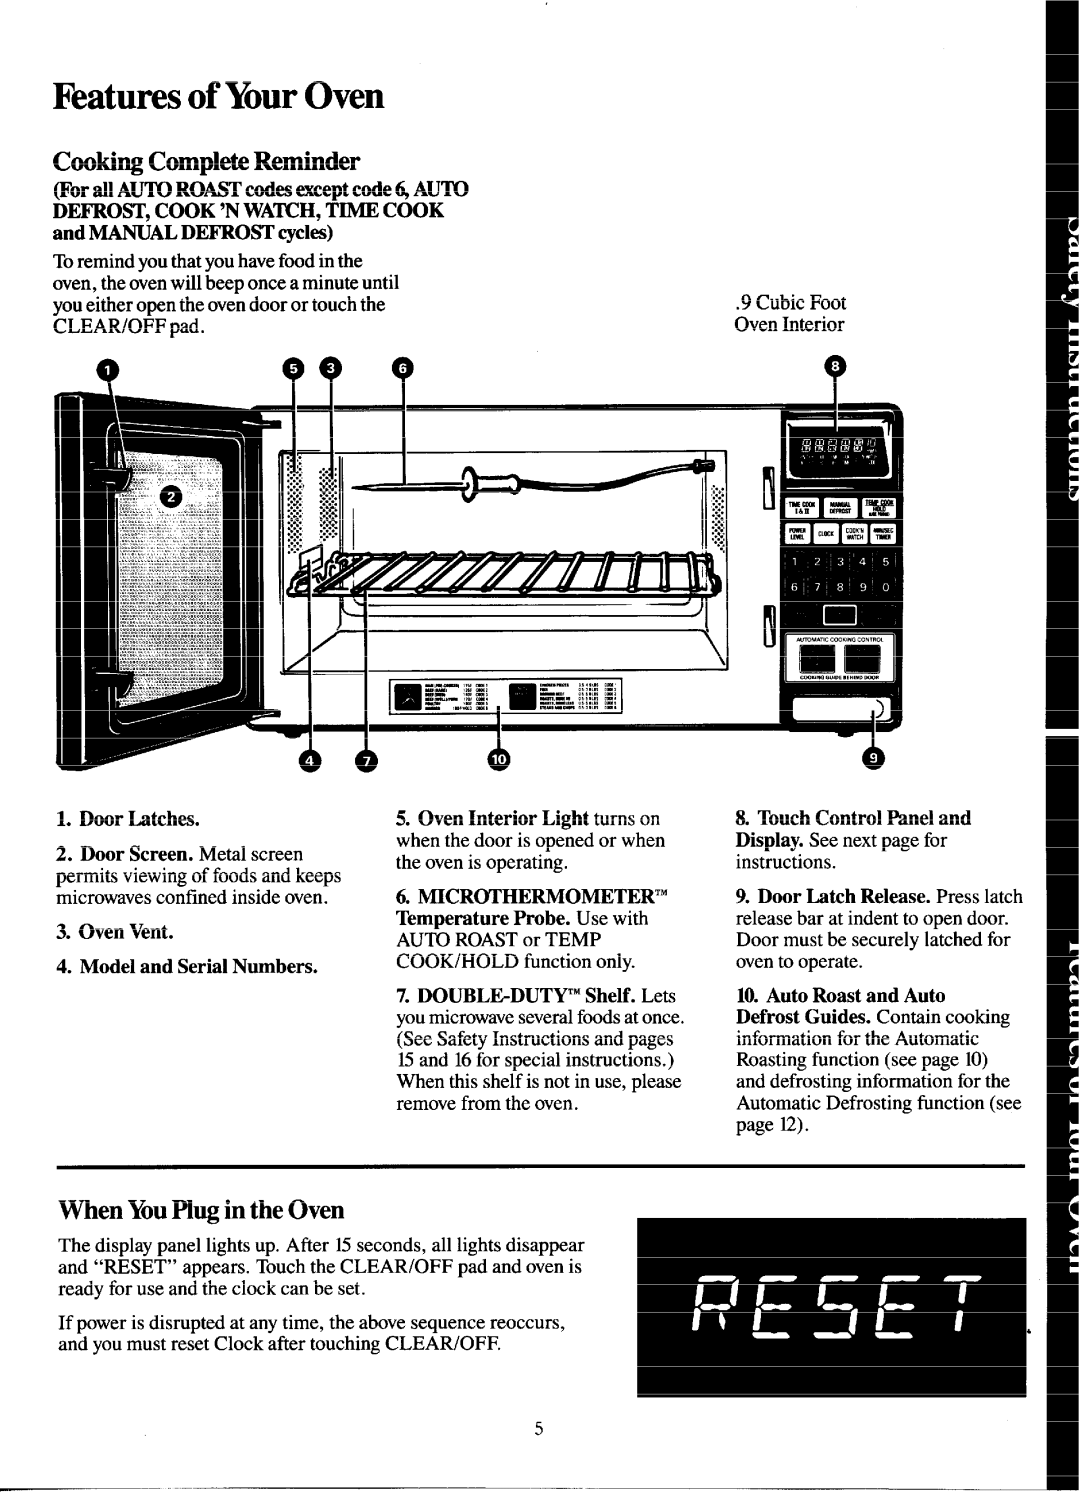 GE JEM31H manual Features of YourOven, Cooking Complete Reminder, When YouPlug in the Oven, I mm 